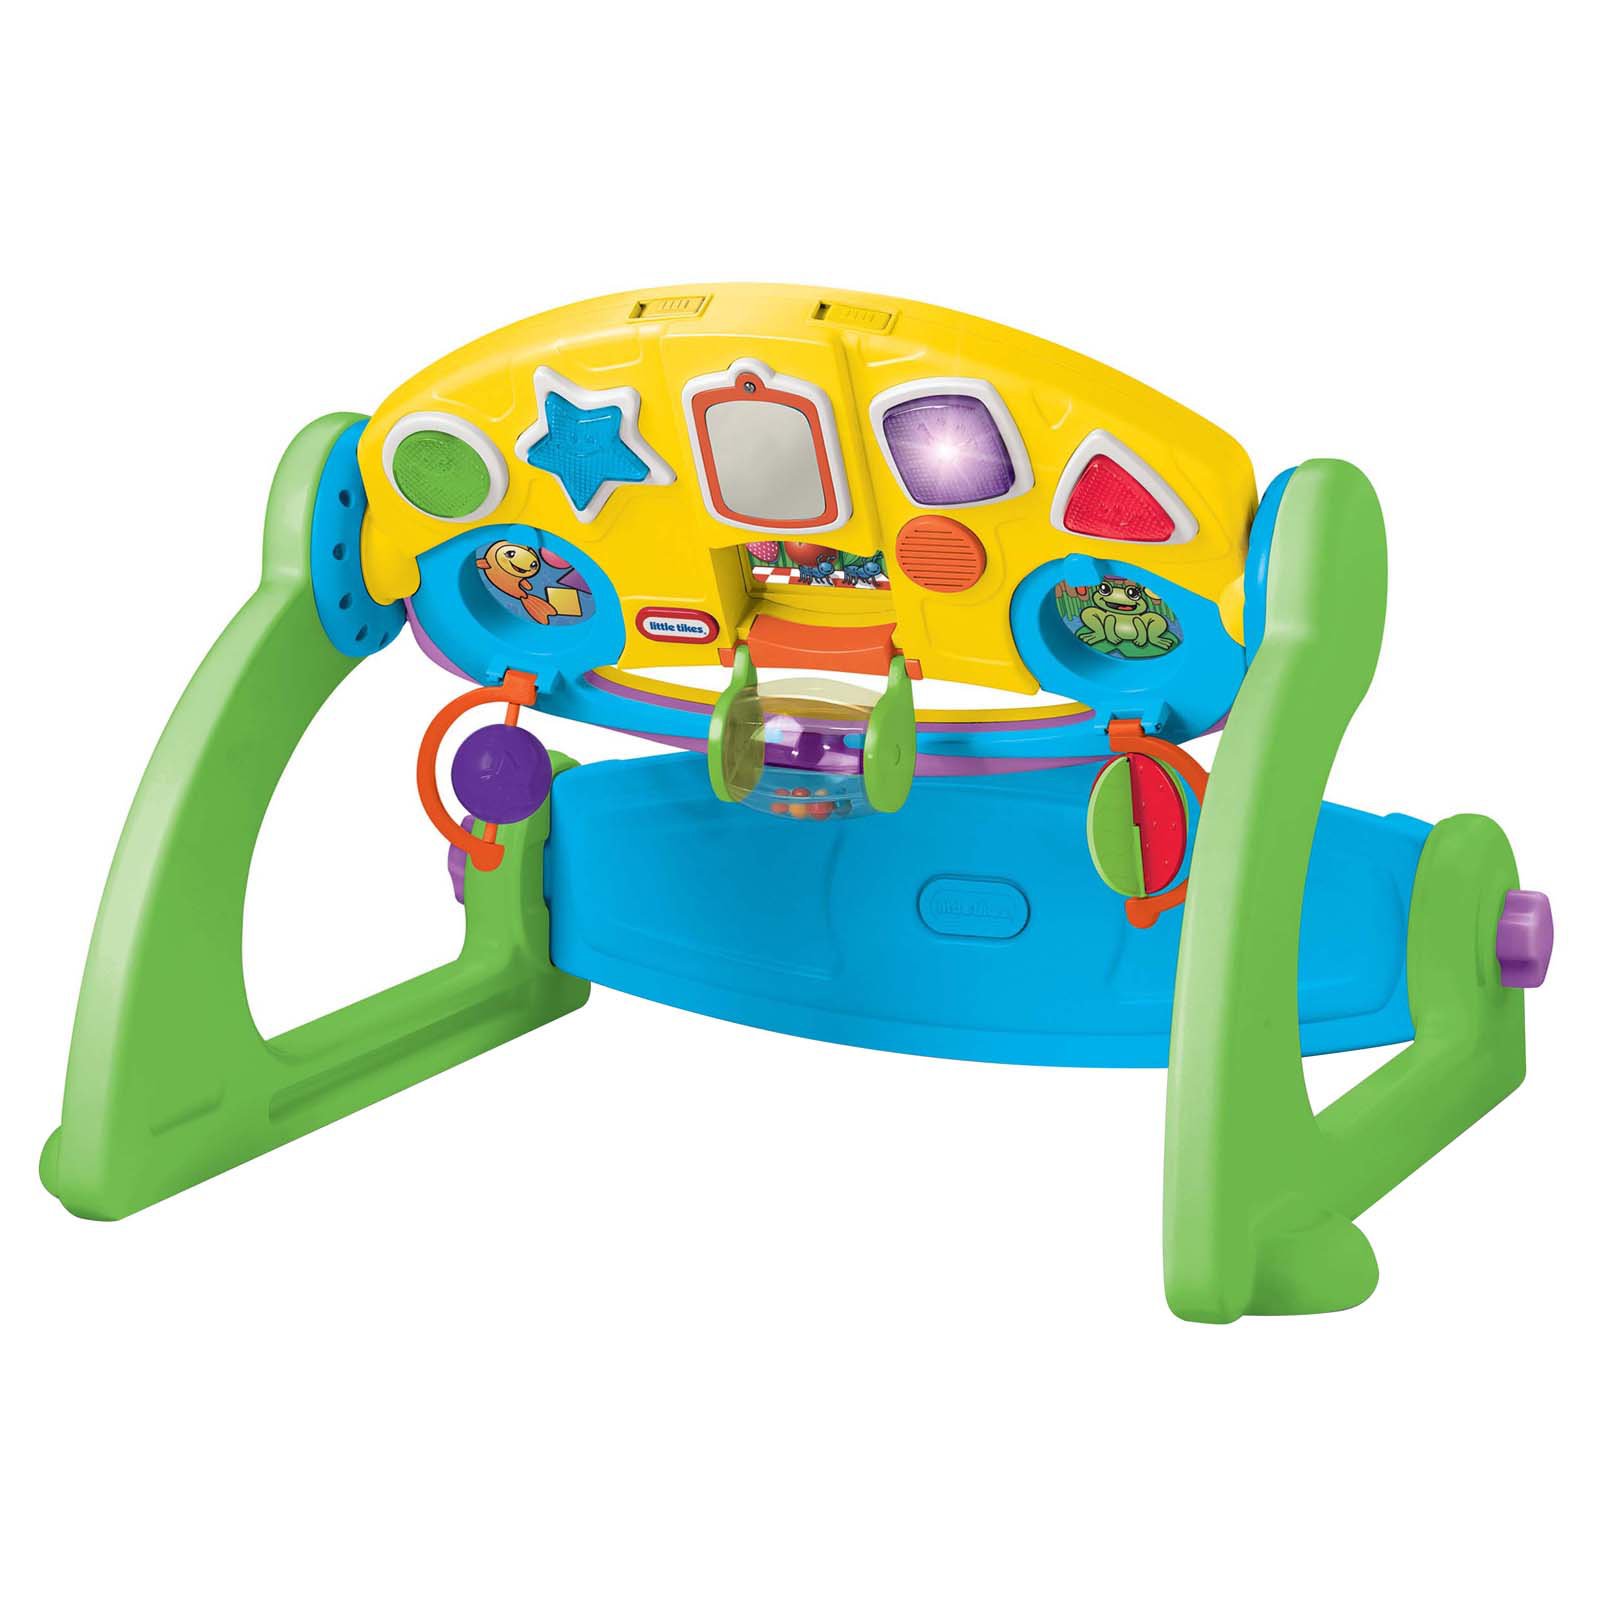 Little Tikes 5-In-1 Adjustable Gym - image 1 of 5